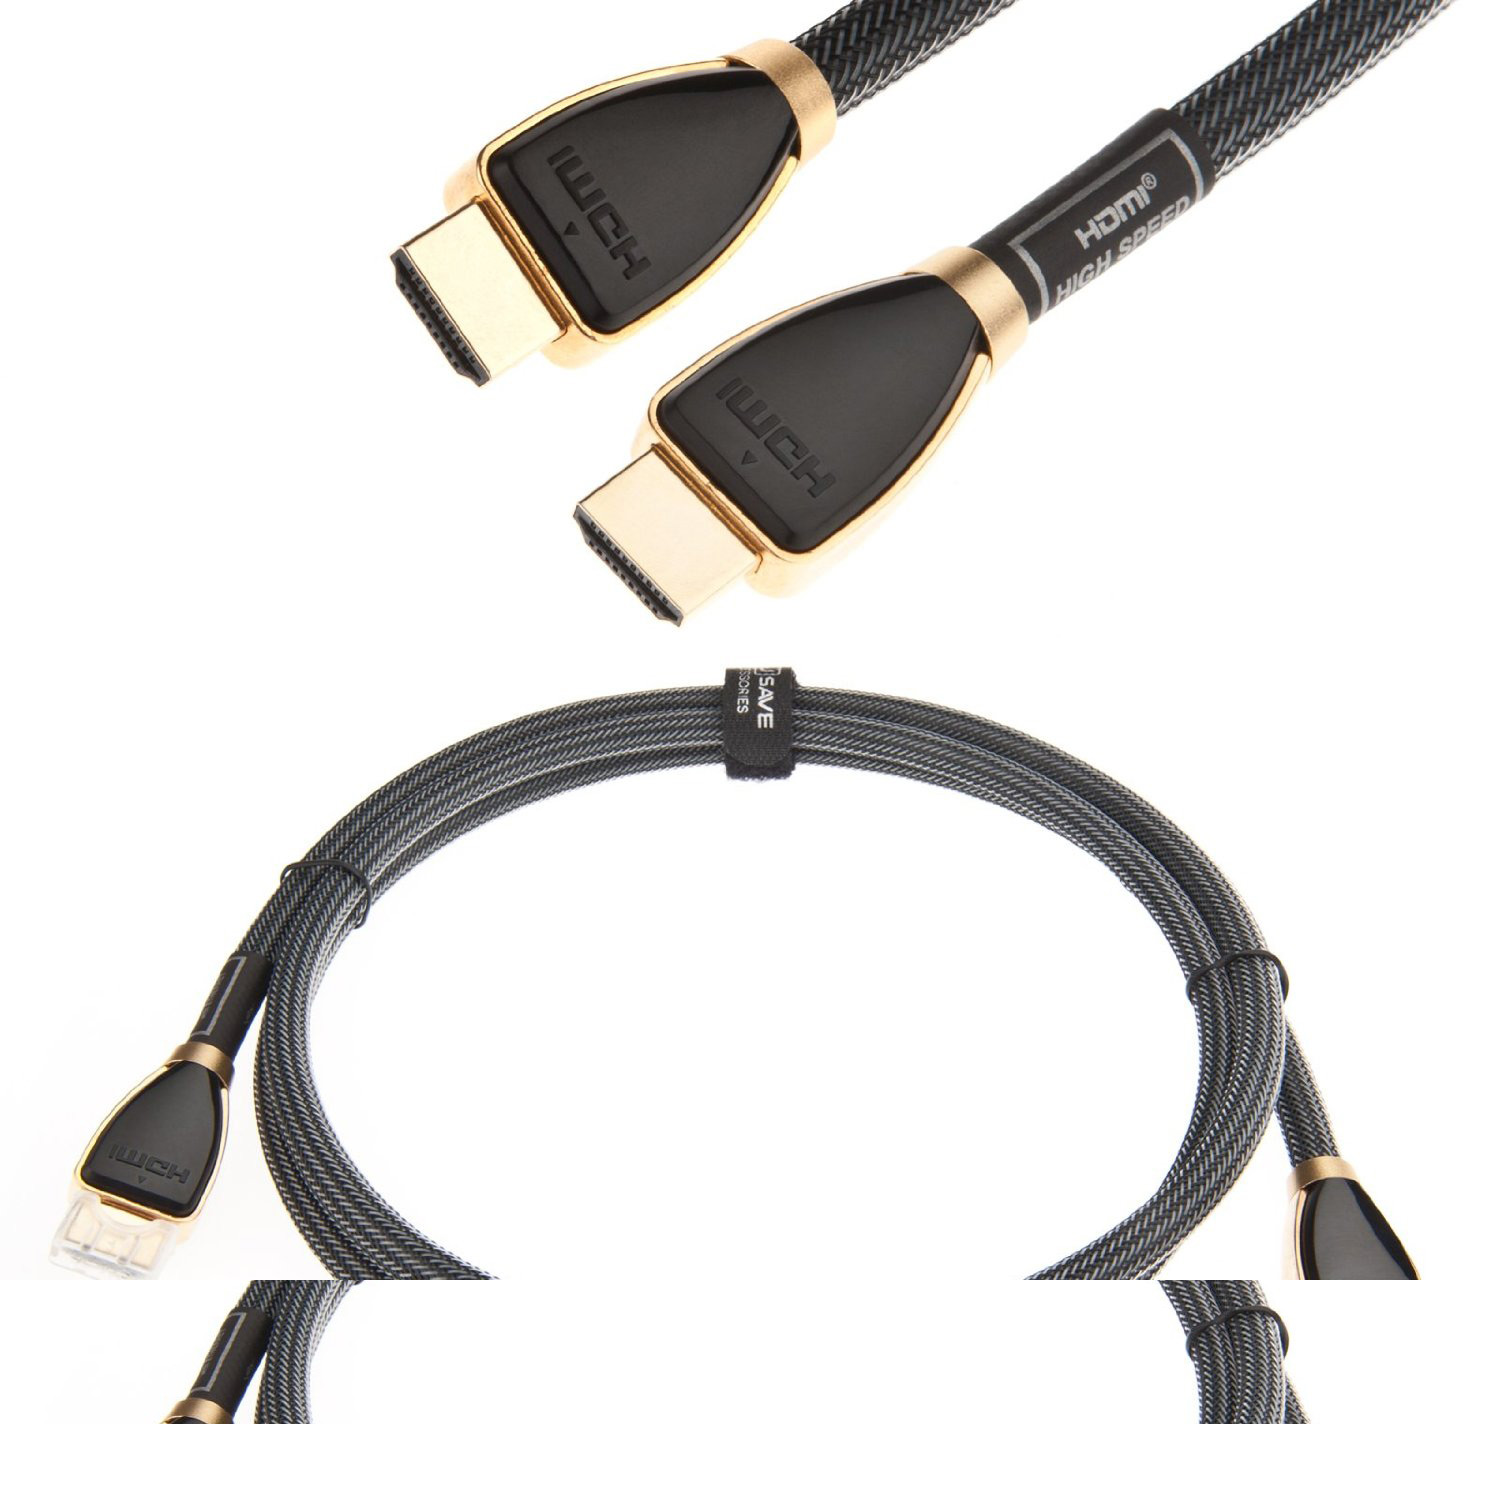 YouSave Accessories Accessories HDMI Cable 1.5m Gold Connectors